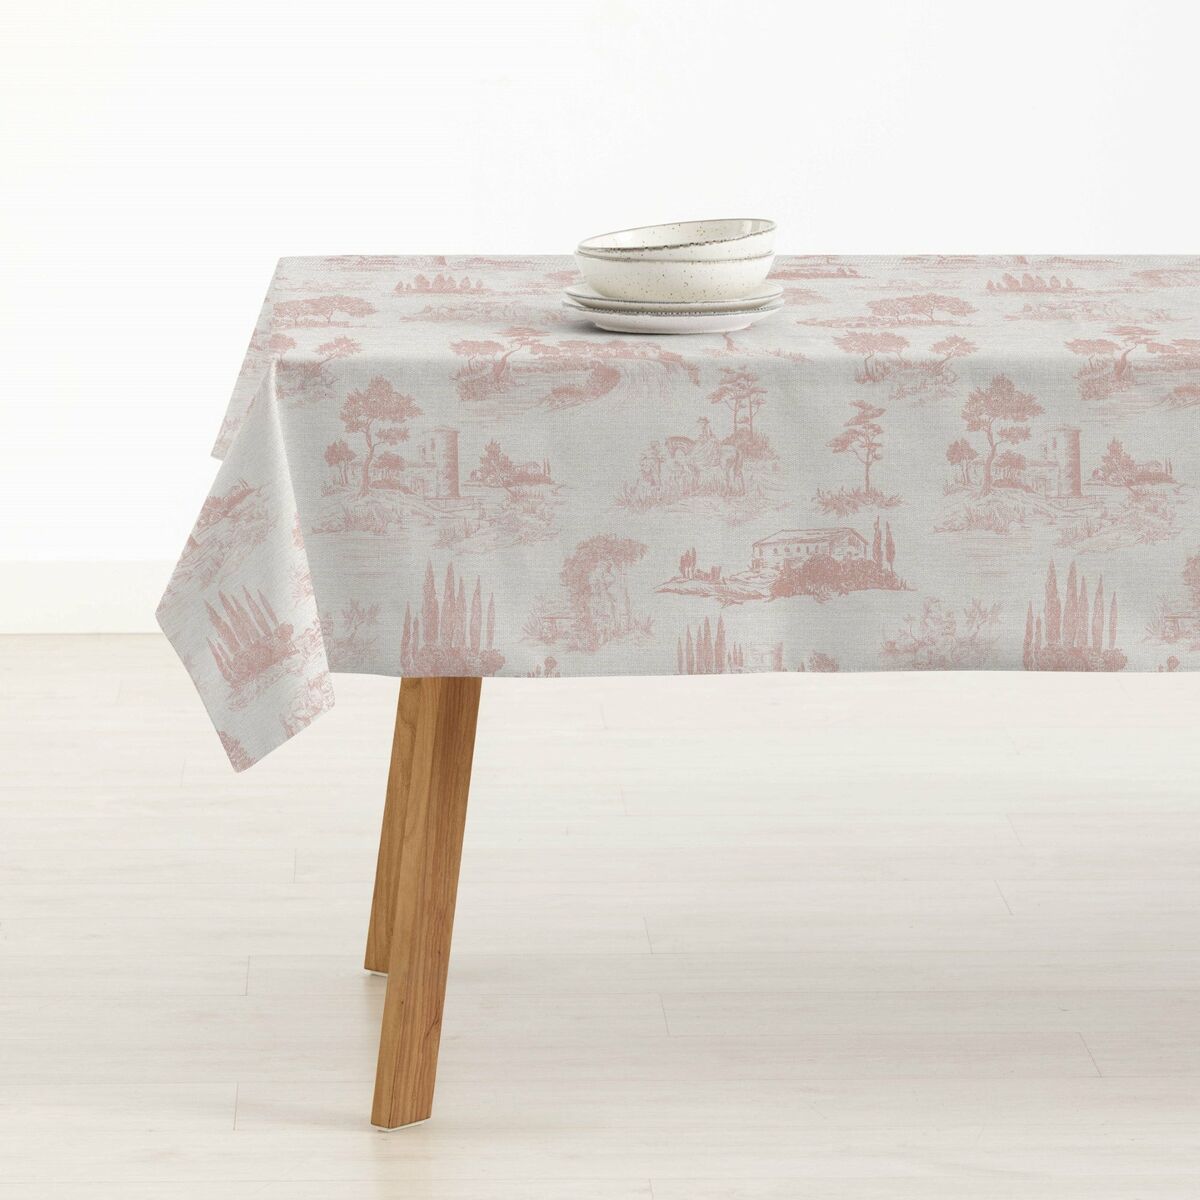 Stain-proof tablecloth Belum 0120-371 300 x 140 cm